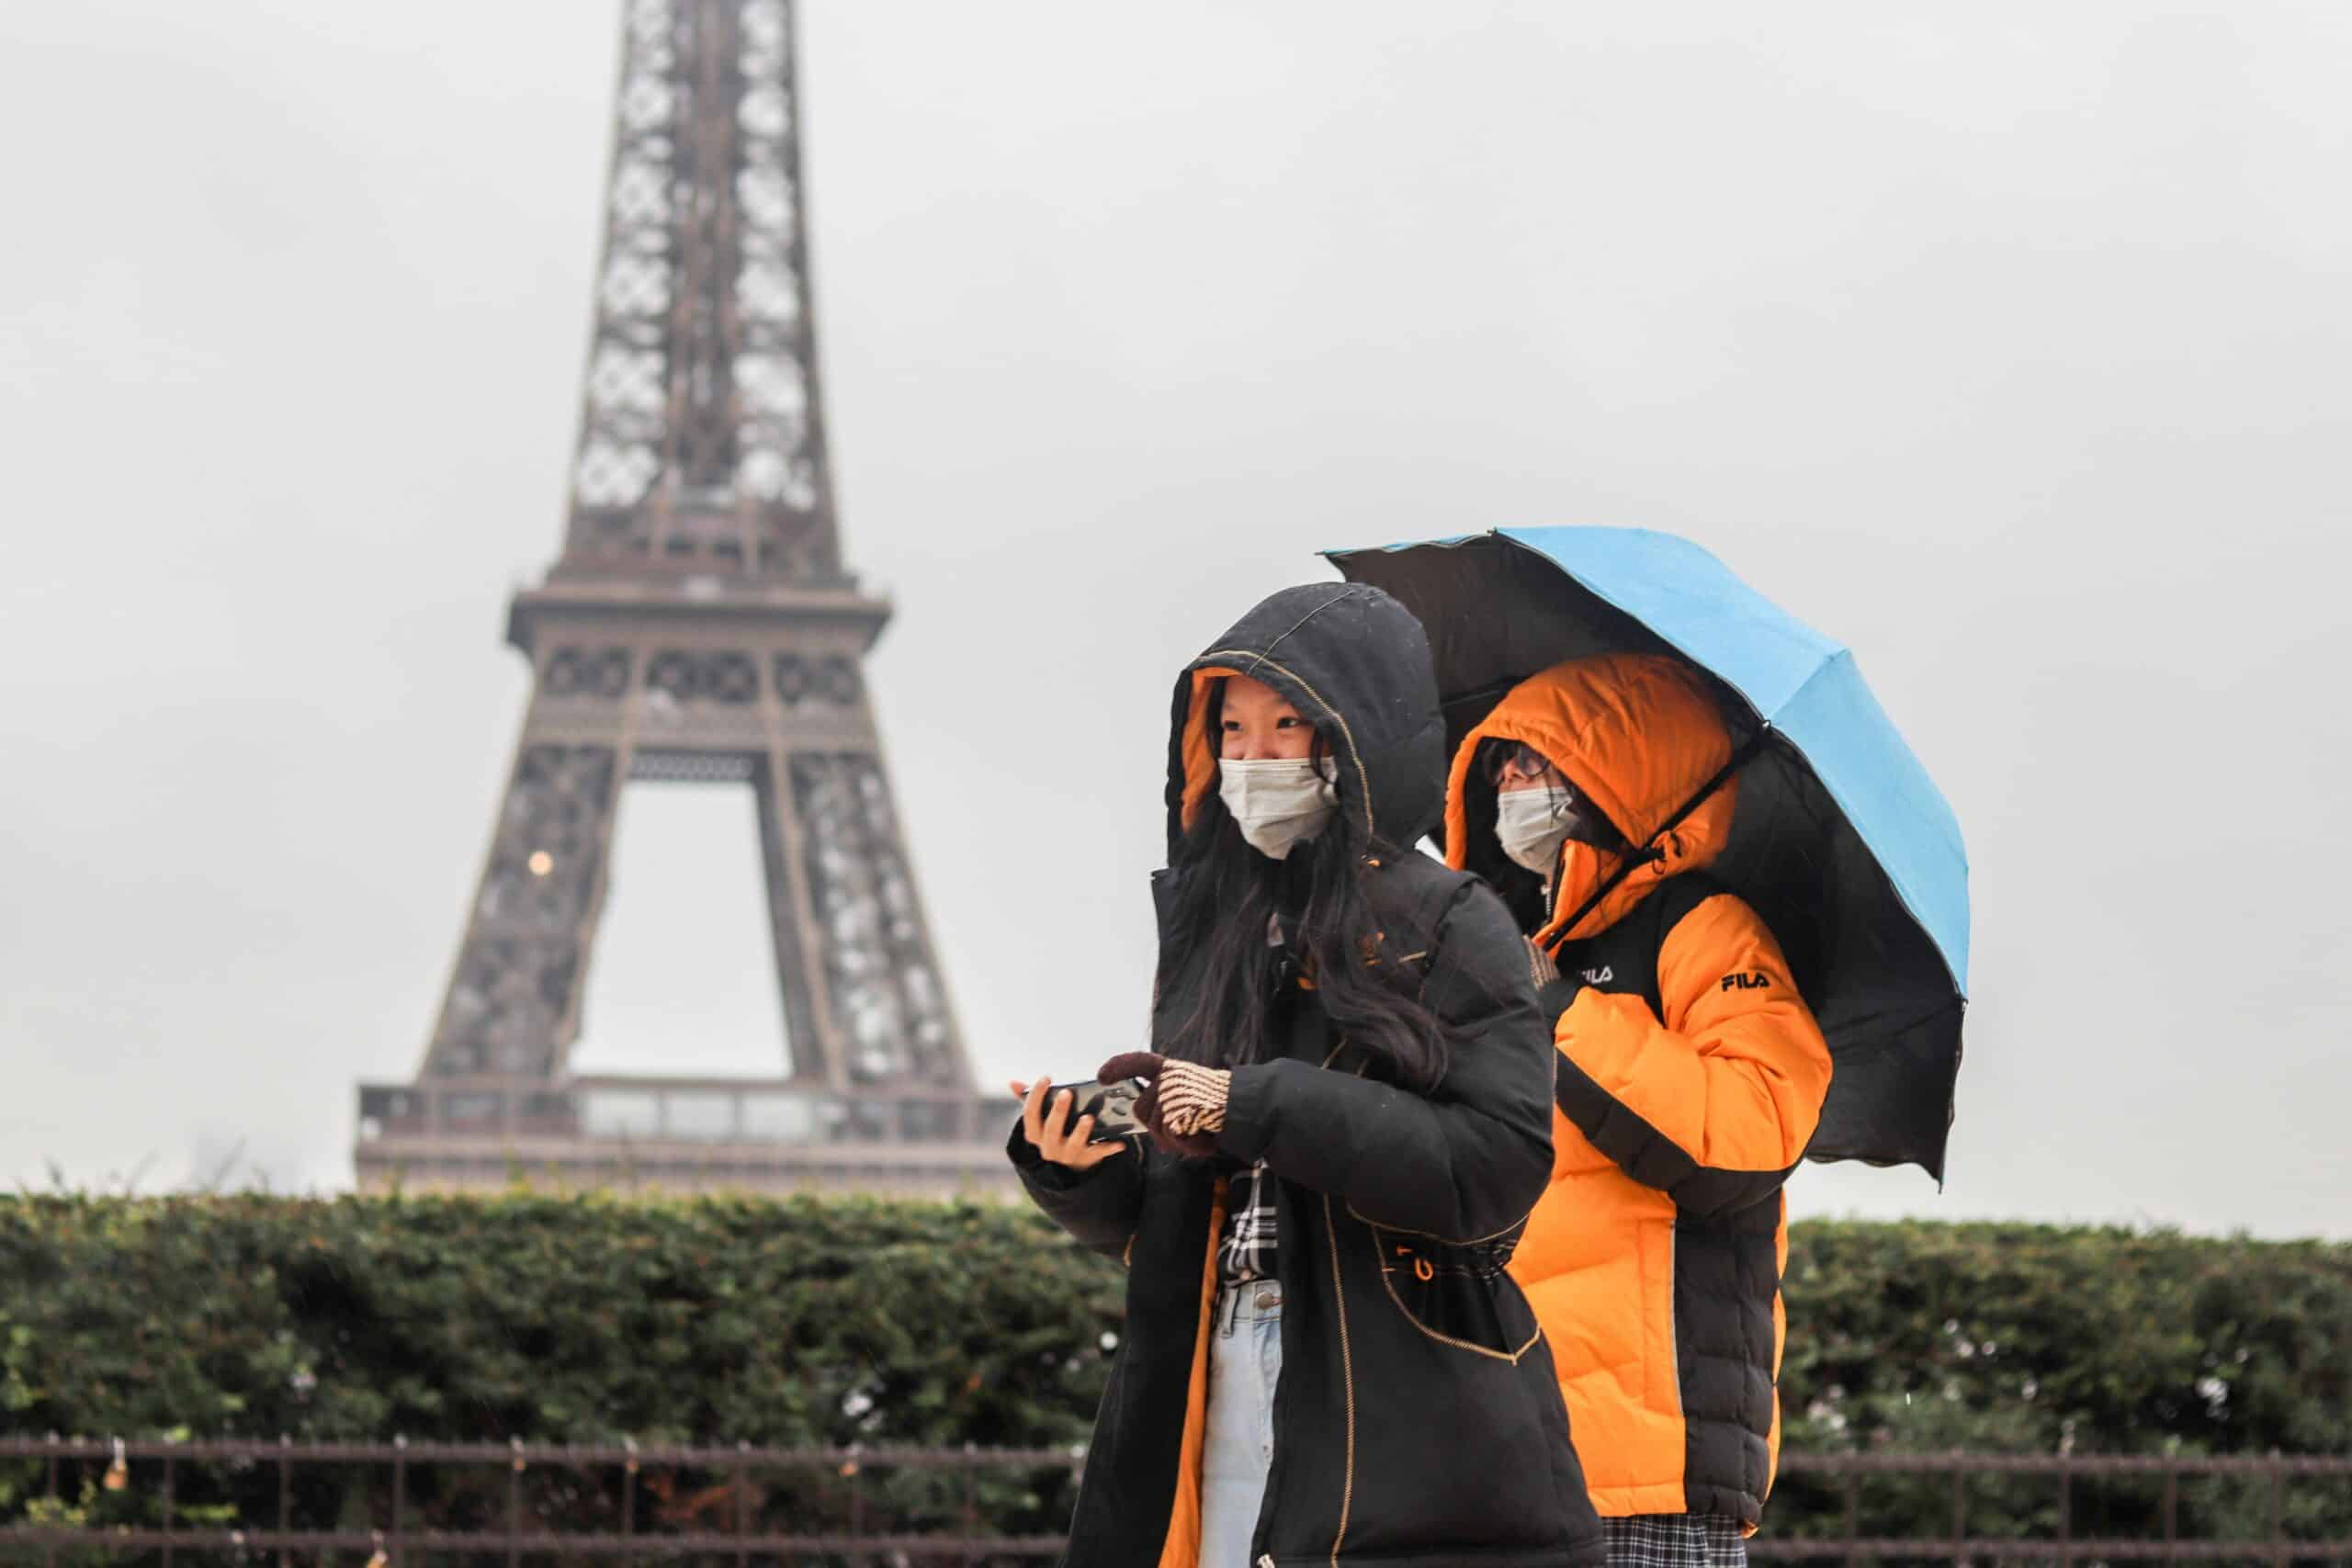 Two people walk in front of the Eiffel Tower in the rain, wearing rain jackets and holding an umberella